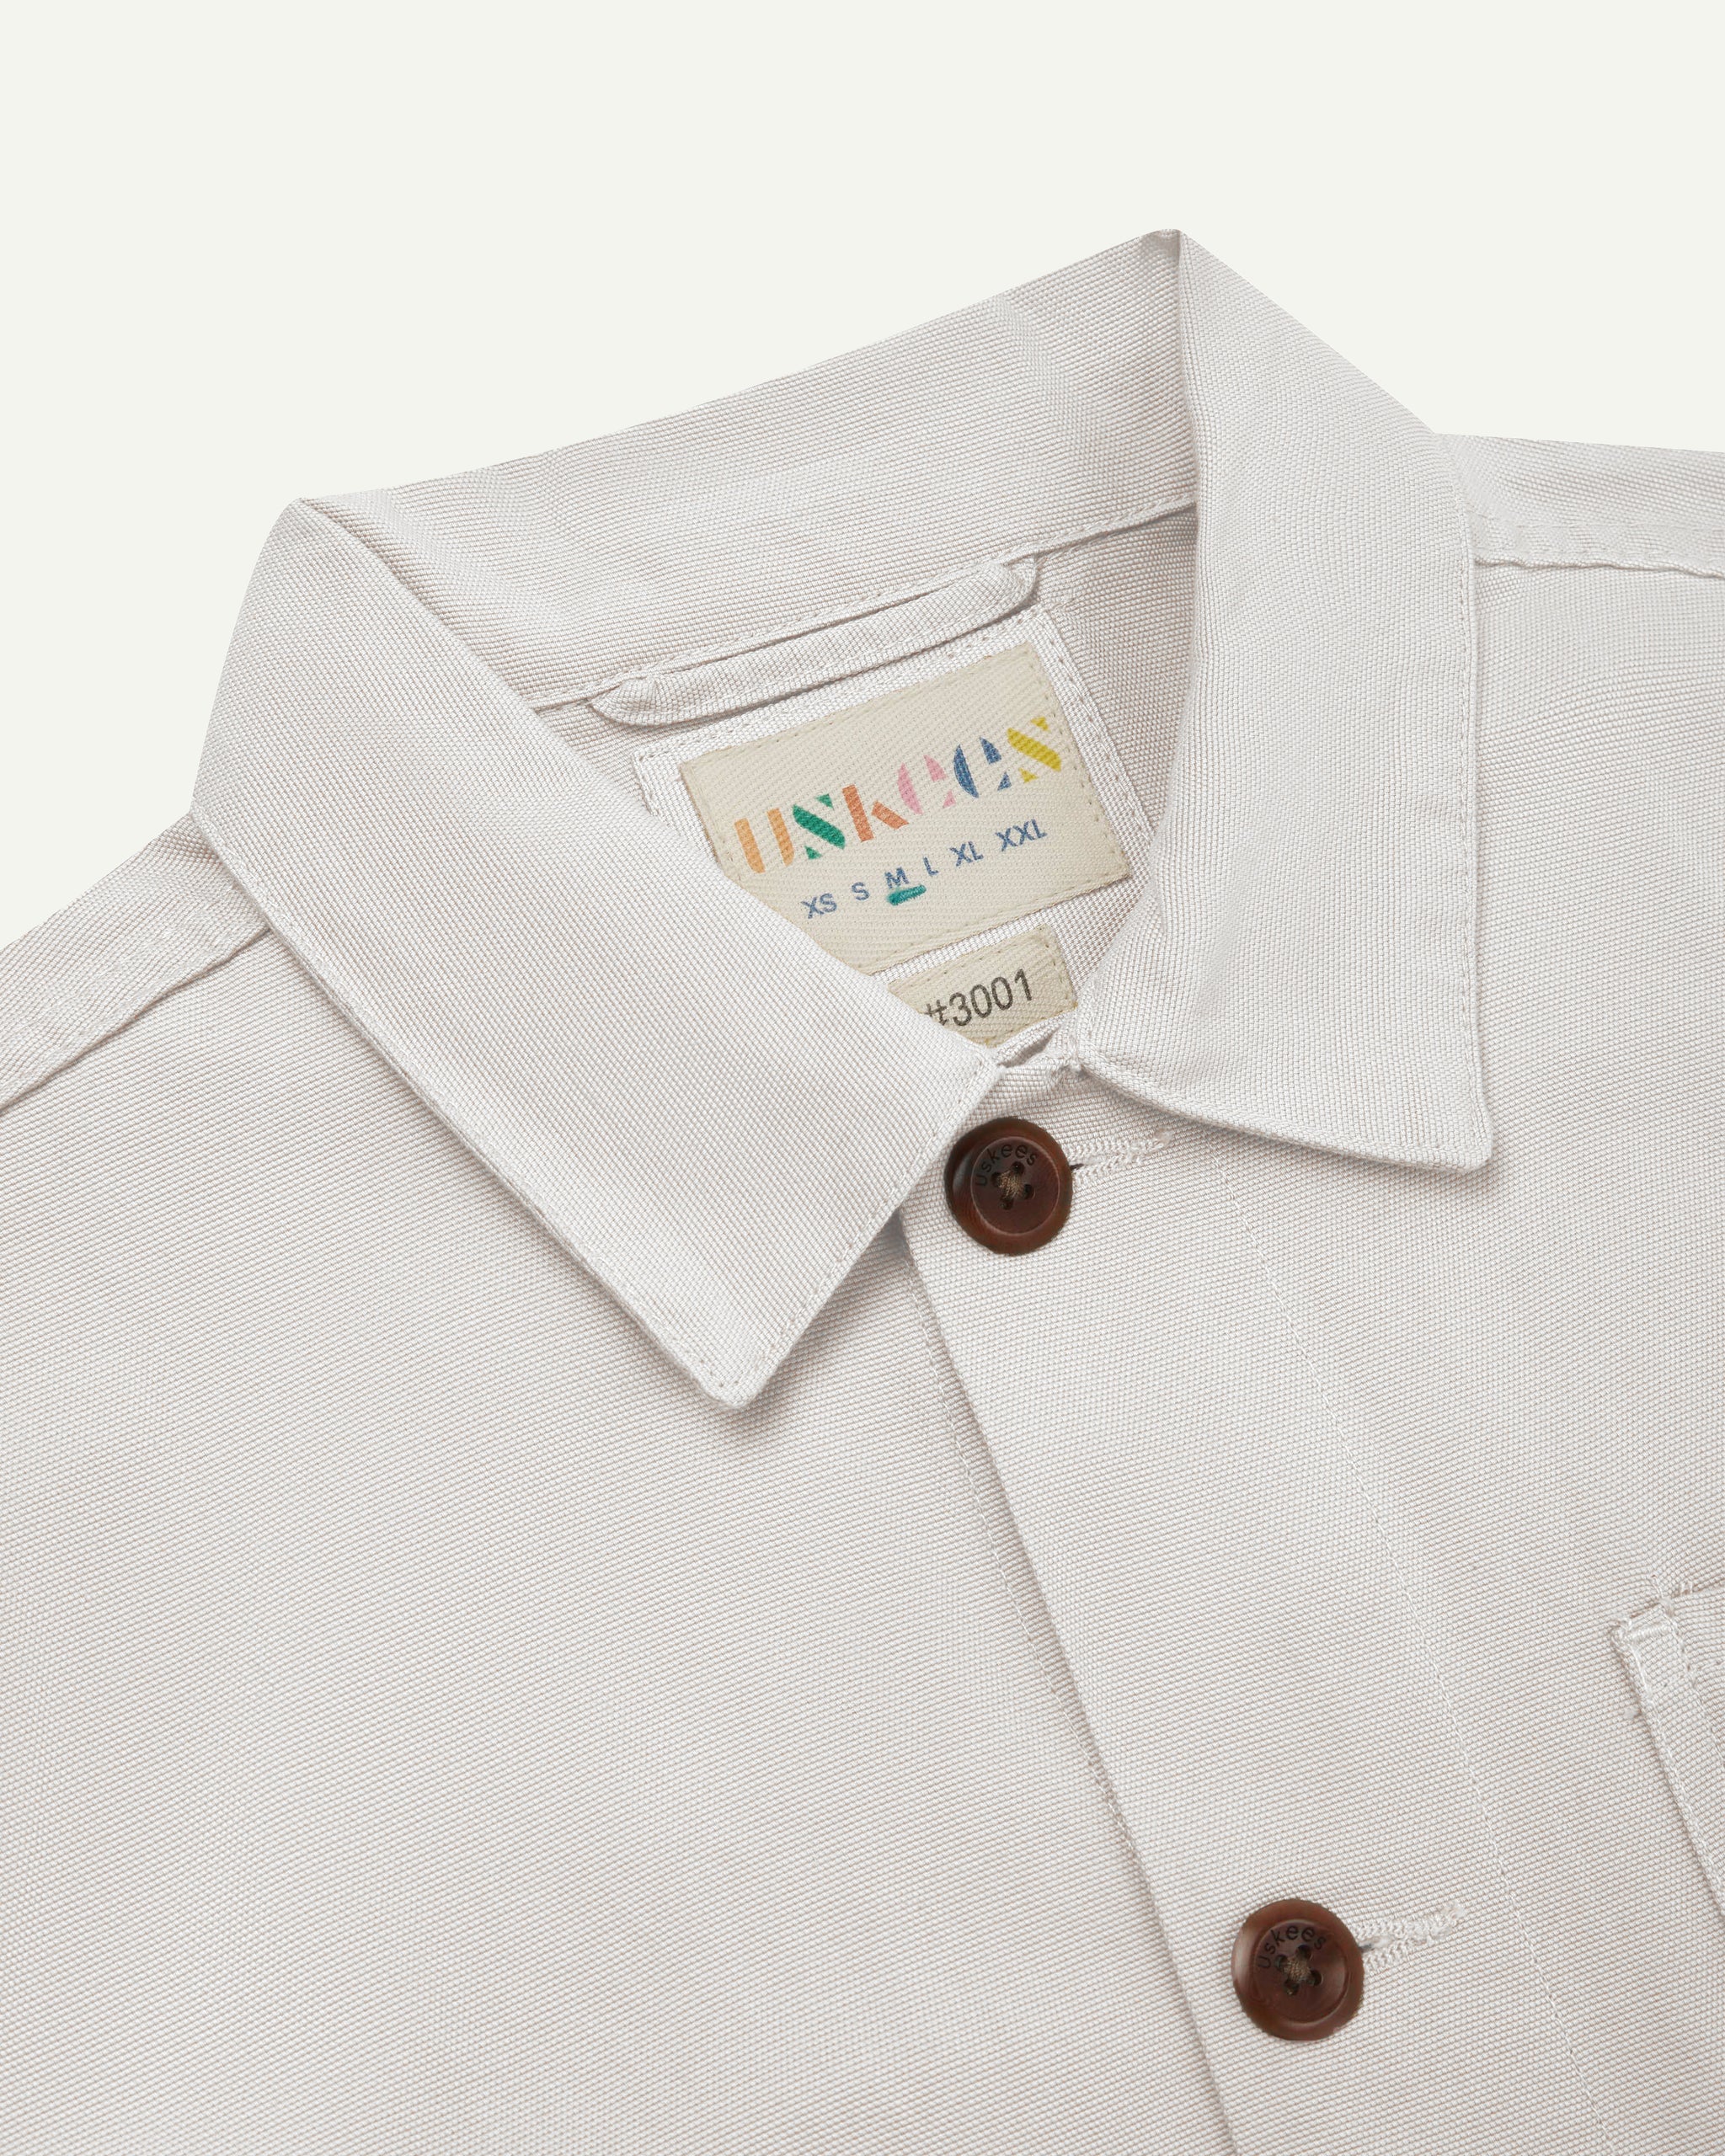 #3001 Cream Buttoned Overshirt | USKEES Organic Apparel